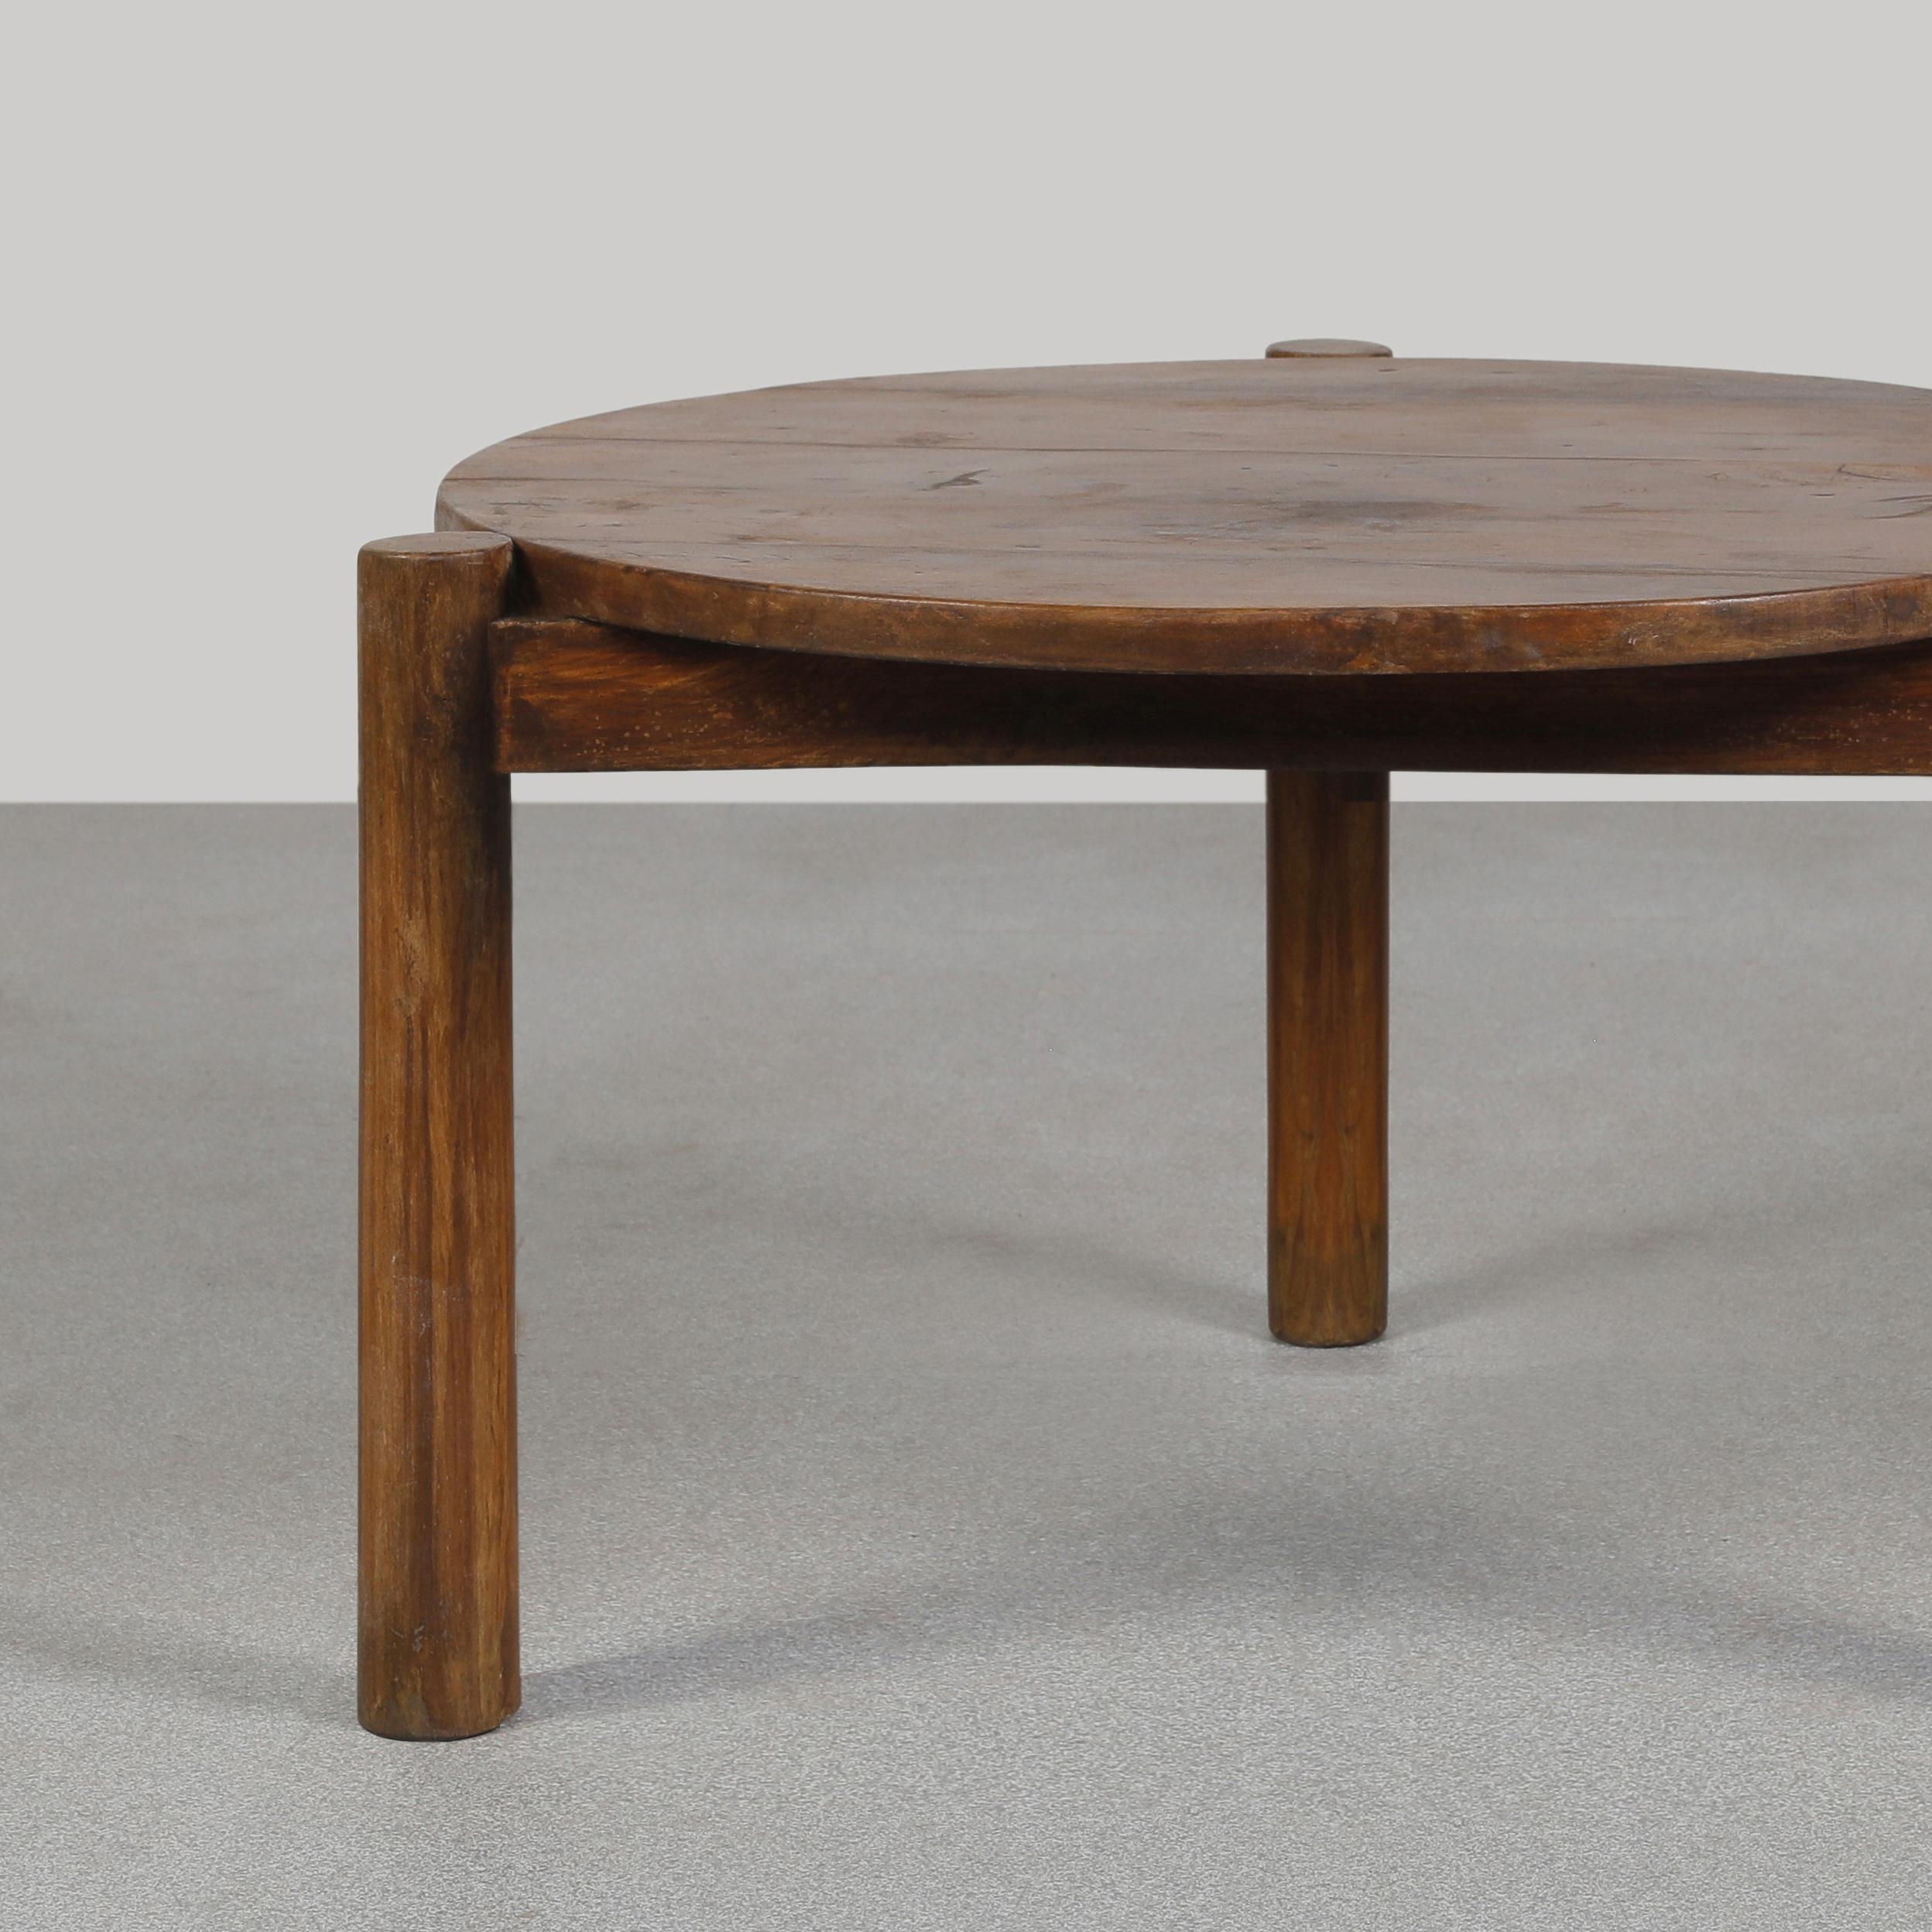 Mid-20th Century Pierre Jeanneret PJ-TB-04-A Round Low Table / Authentic Mid-Century Modern For Sale